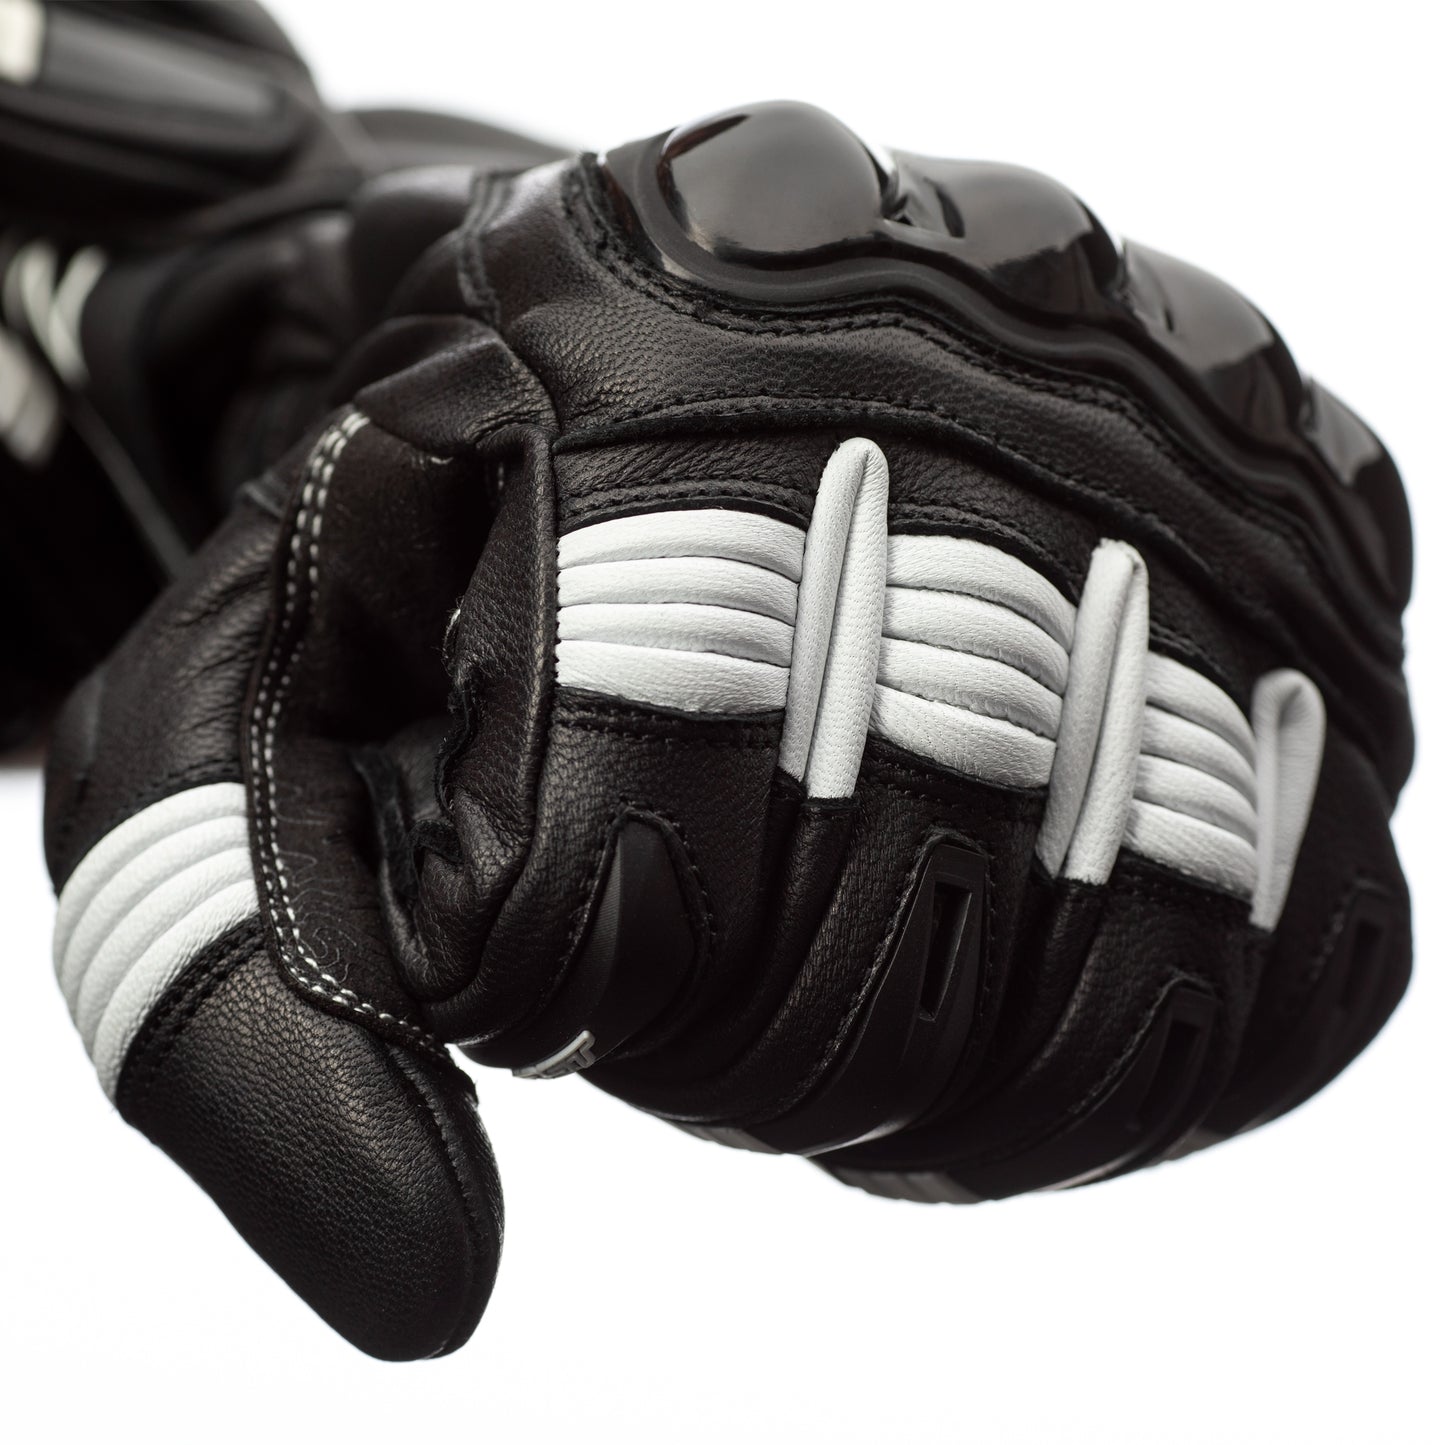 RST Pilot Leather Riding Gloves - CE APPROVED - Black/White